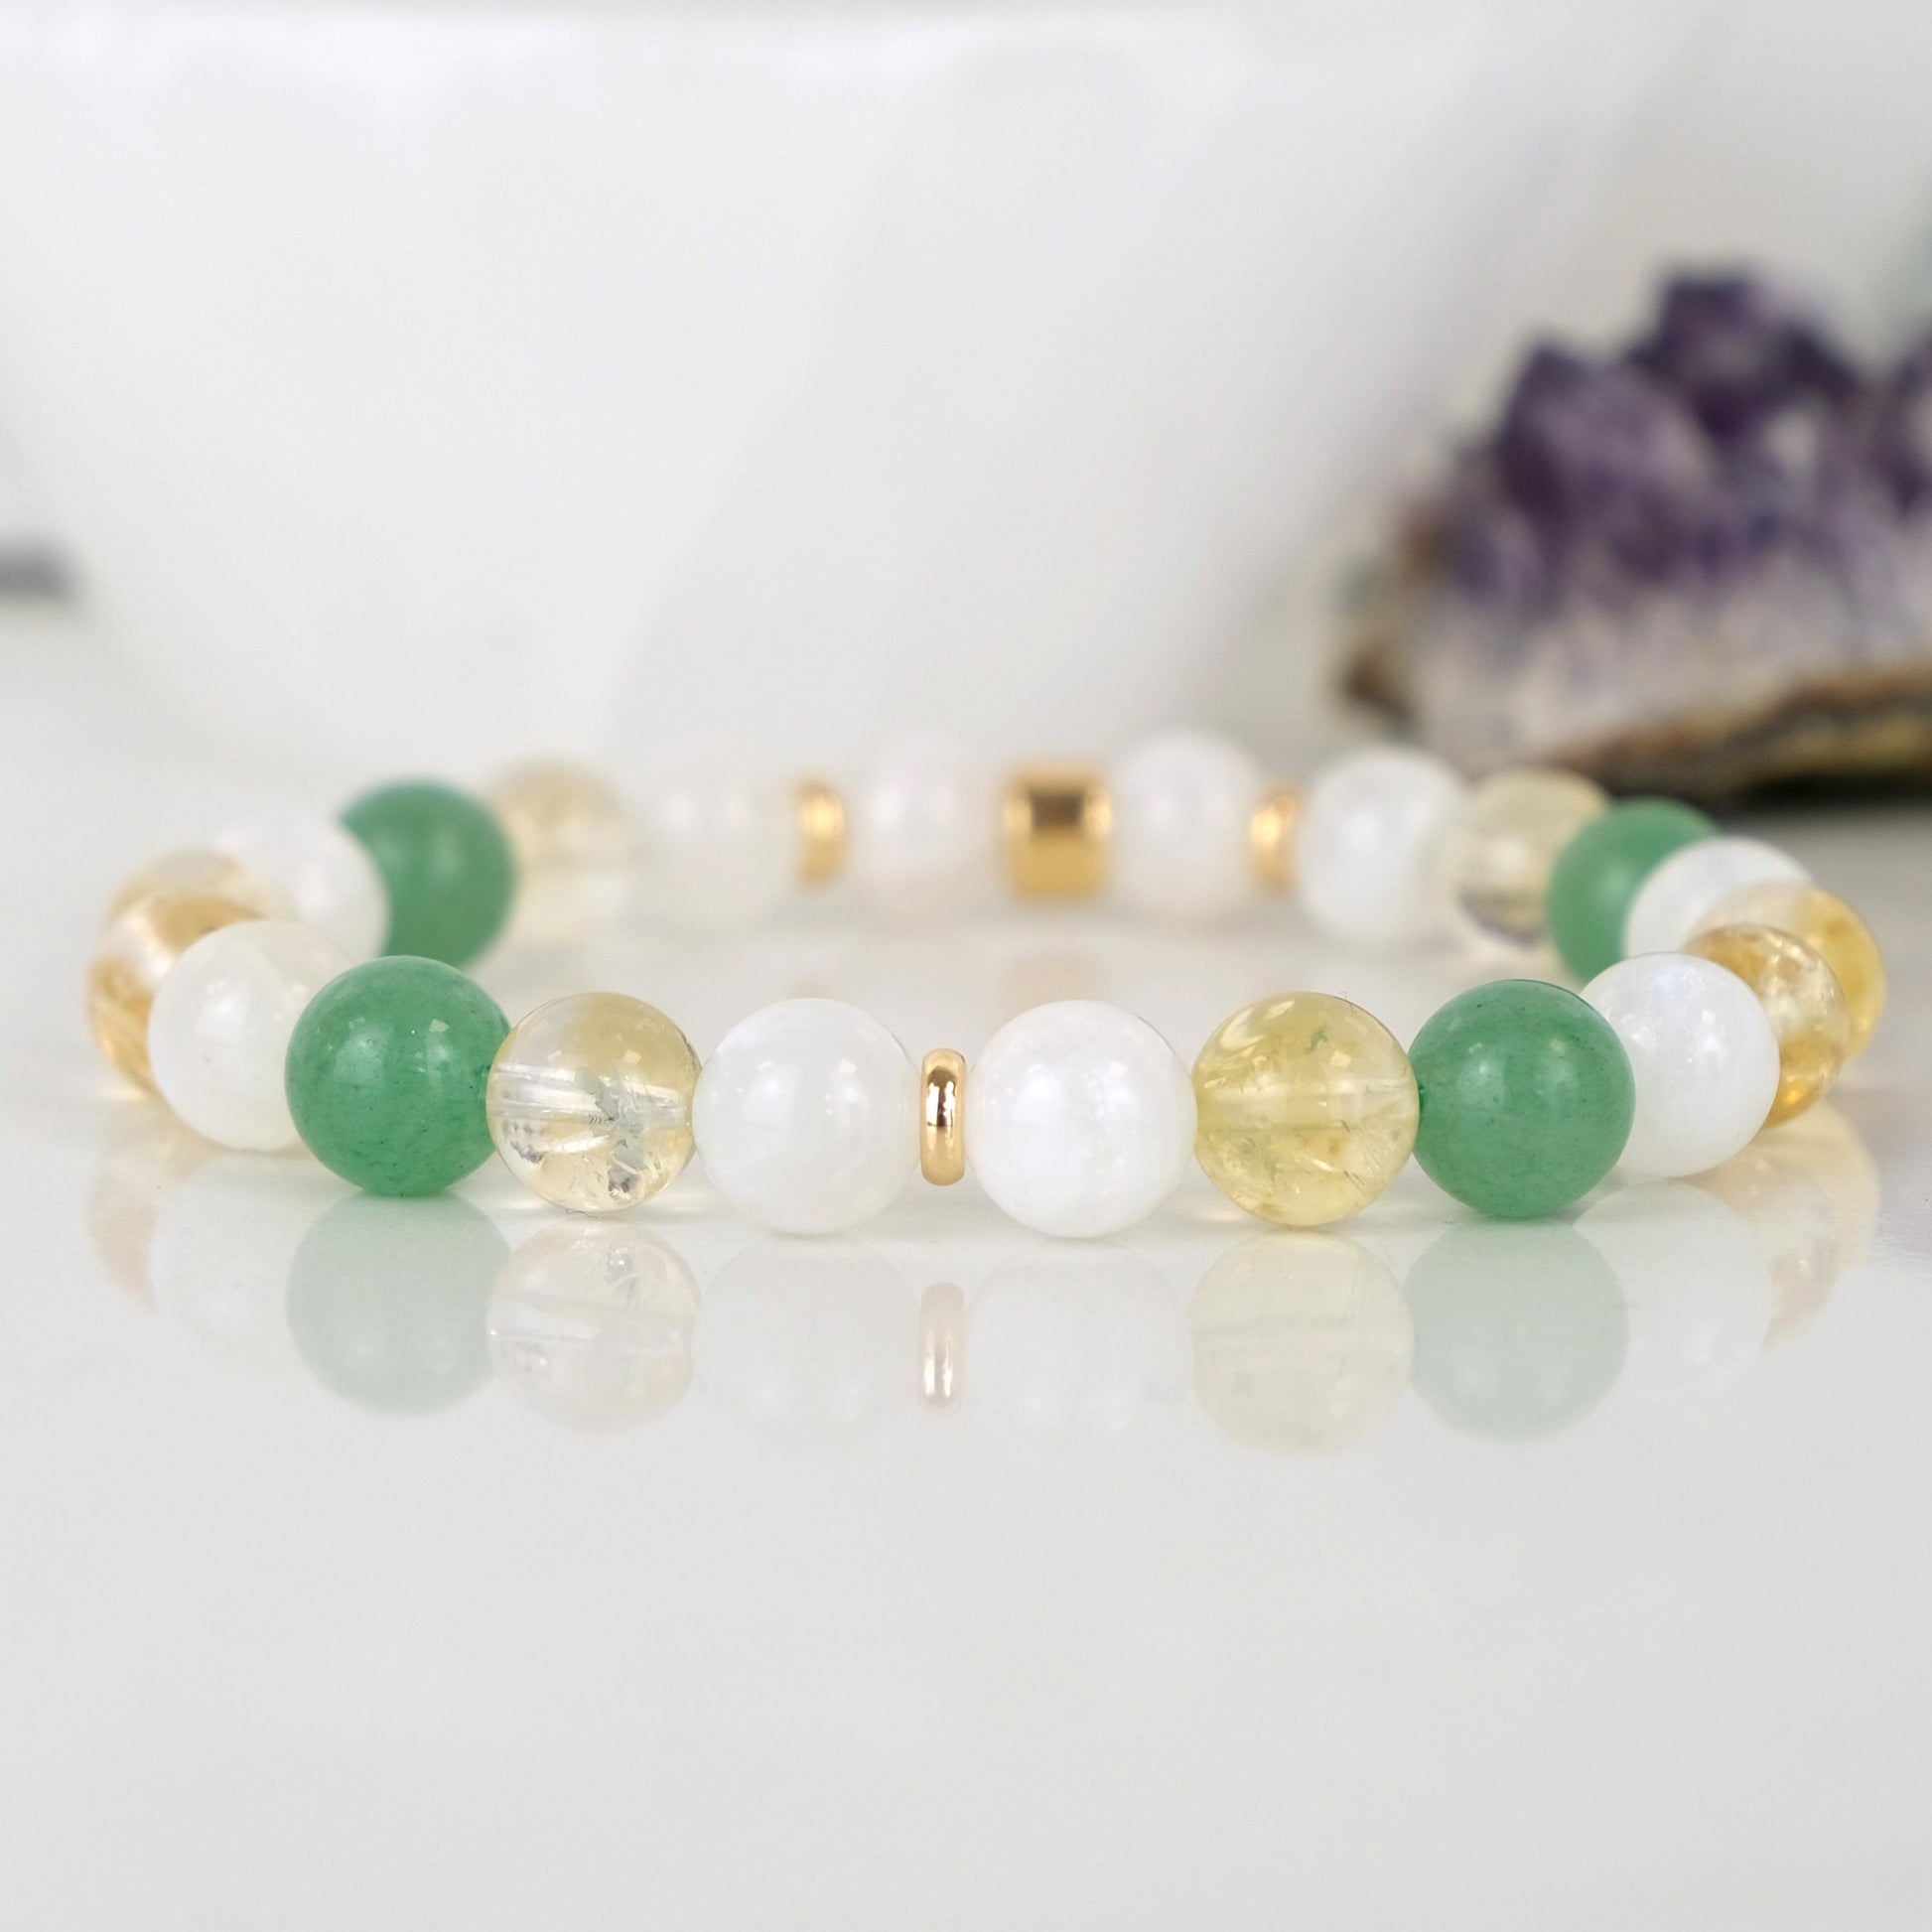 An aventurine, moonstone and citrine gemstone bracelet with gold accessories